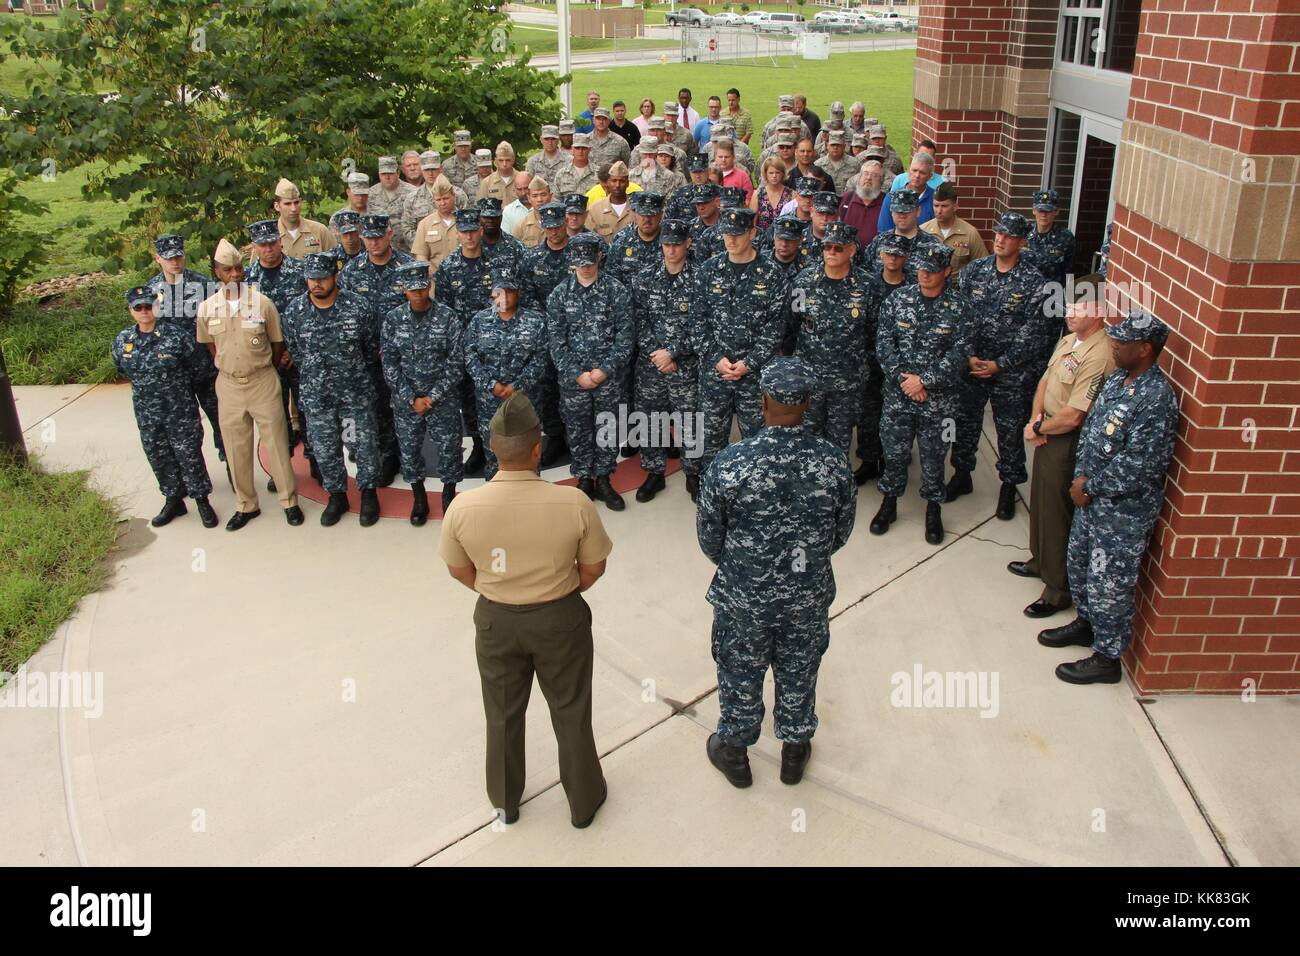 Rear Admiral Eric Coy Young, commander of Navy Reserve Forces Command, and Lt Col Alvin Bryant, an inspector and instructor with the 3rd Battalion, 14th Marines, address Sailors, Airmen, and Marines before a moment of silence to honor the five service members killed July 16 in an active shooter attack at the Navy Operational Support Center in Chattanooga, Tennessee, photo taken in Hattanooga, Tennessee. Image courtesy Logistics Specialist 1st Class America Henry/US Navy, 2015. Stock Photo